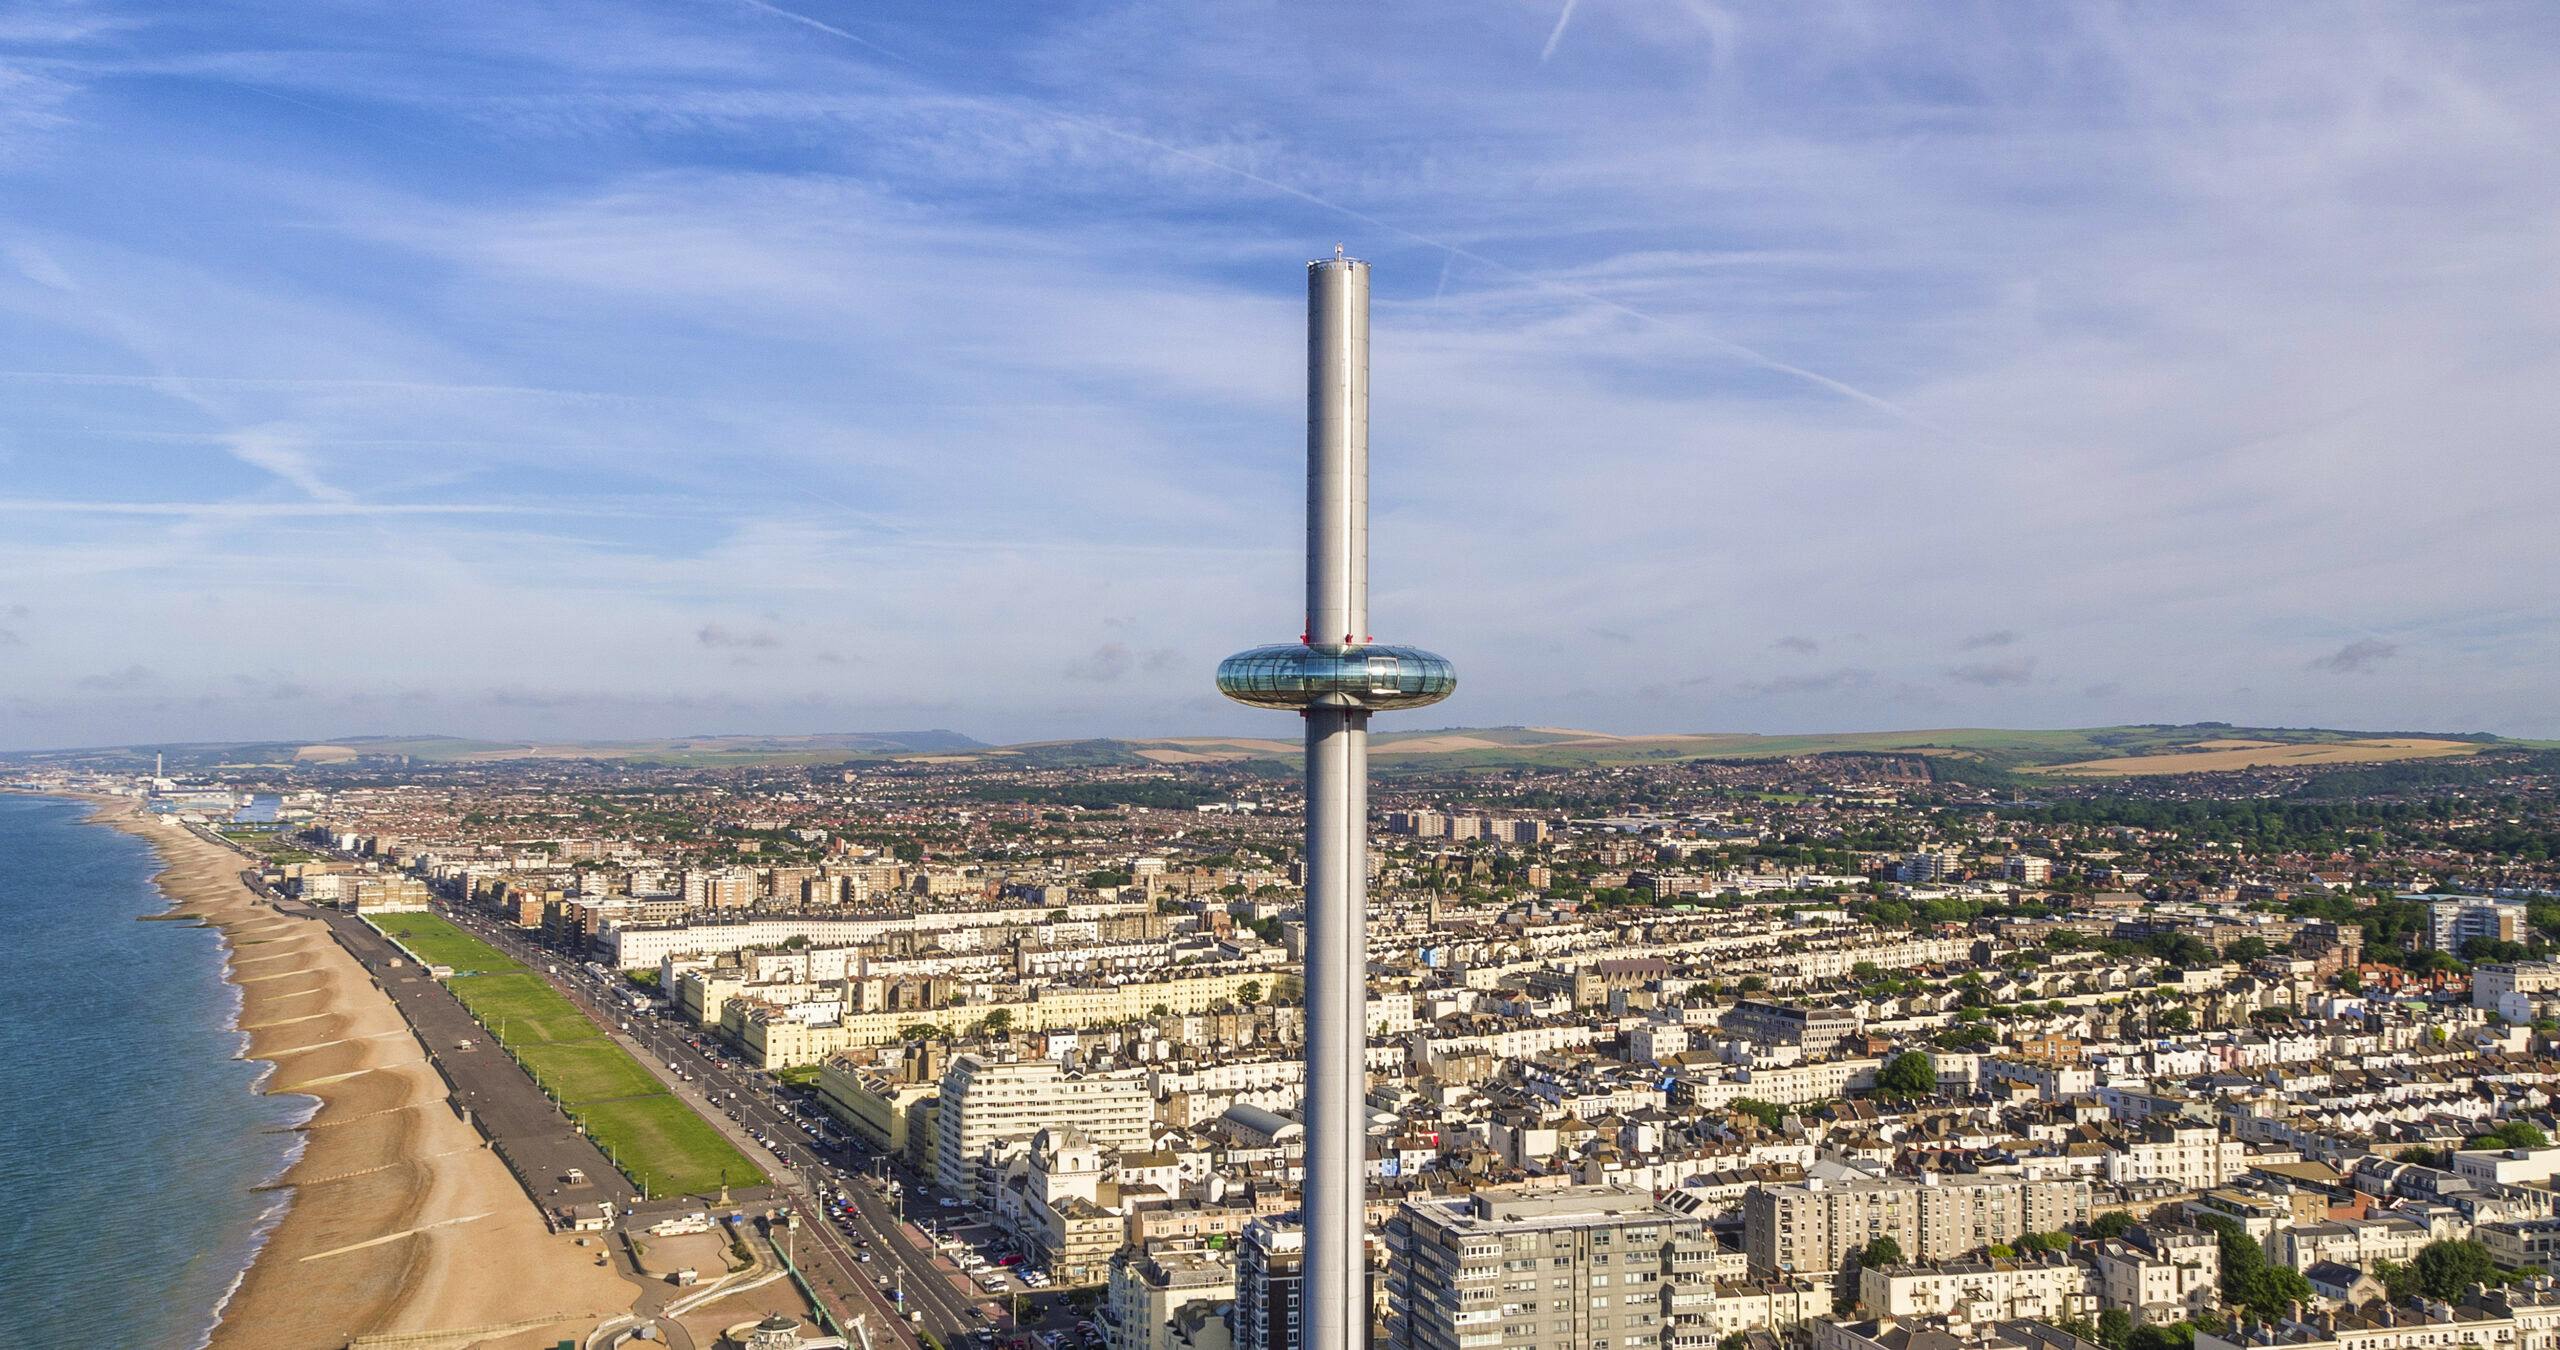 British Airways i360 Drone image 13 View West Credit Visual Air|South downs national park|Royal Pavilion|British Airways i360 Viewing Tower|Worthing Pier|Carats Cafe